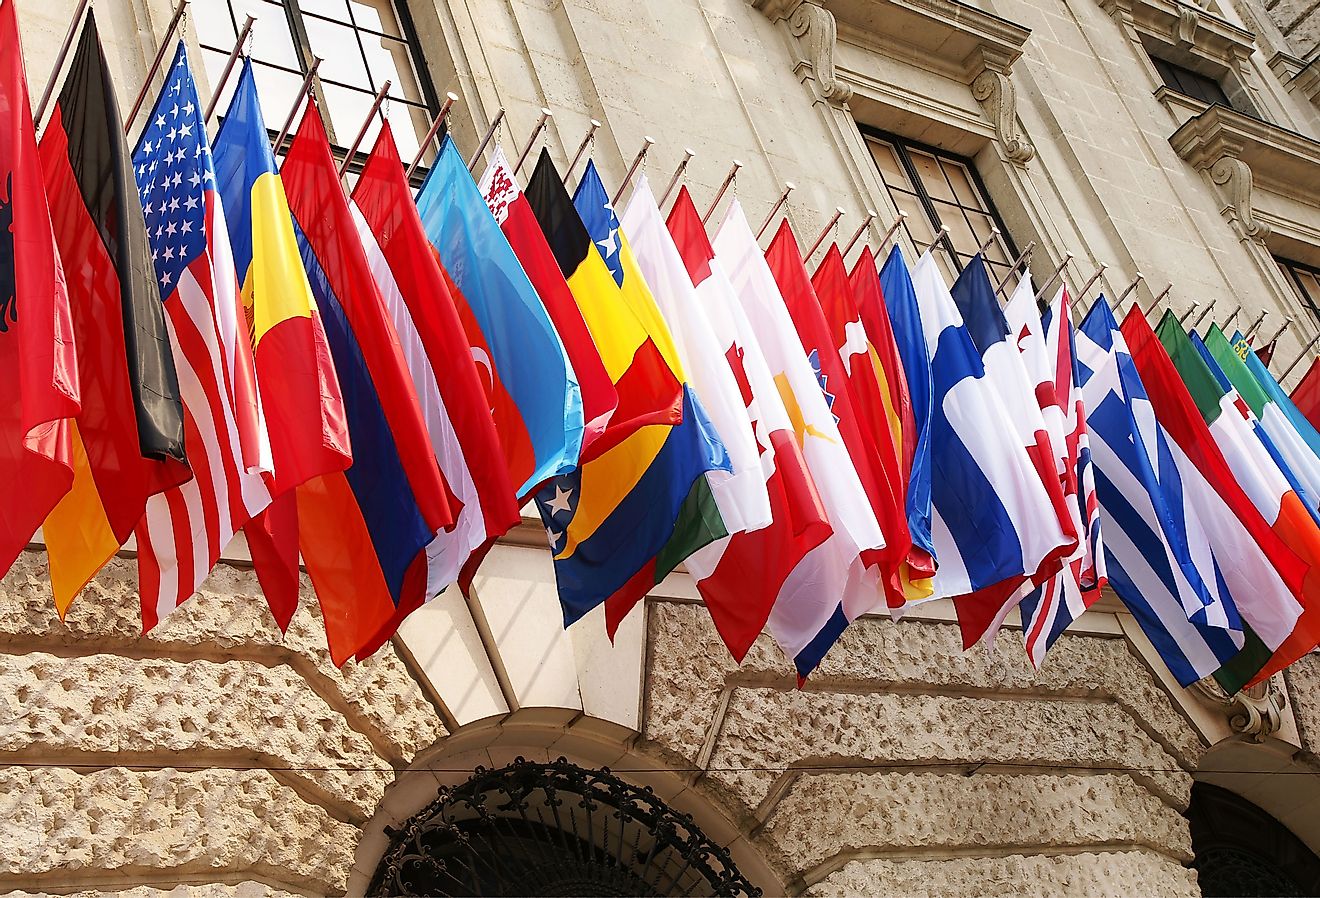 Many flags of the OECD (Organisation for Economic Co-operation and Development) countries. 